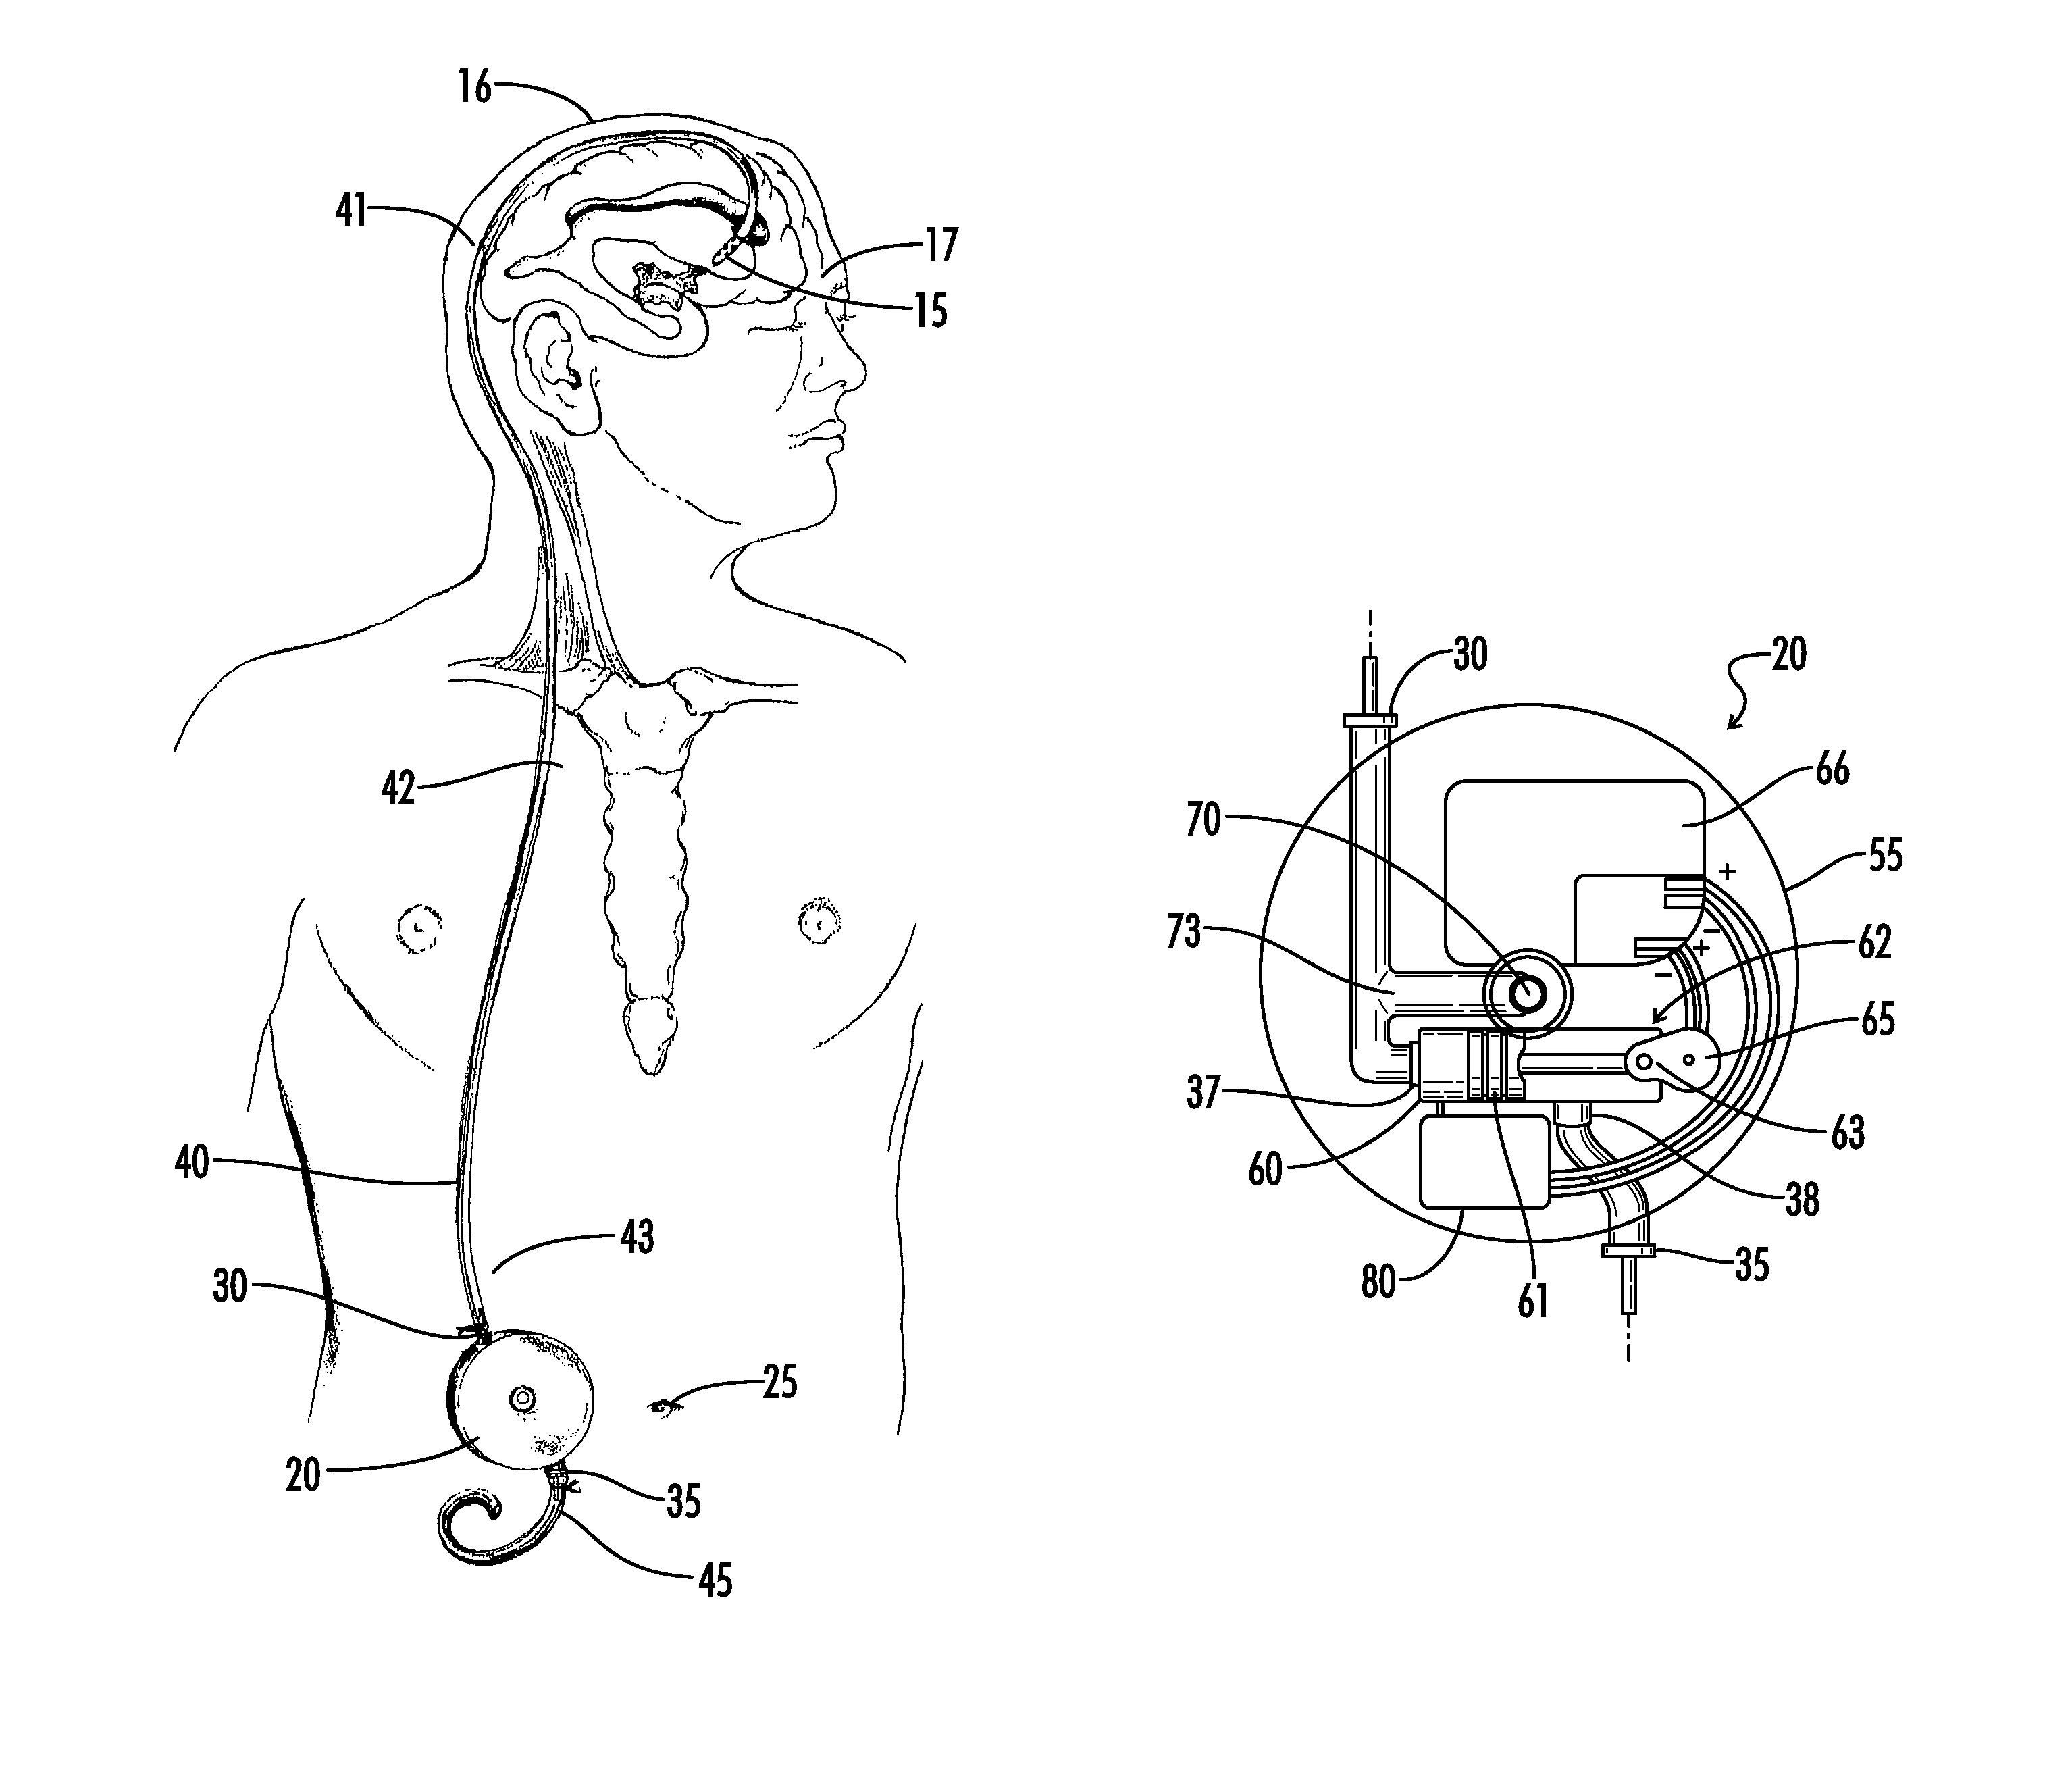 Implantable pump for removal of cerebrospinal fluid